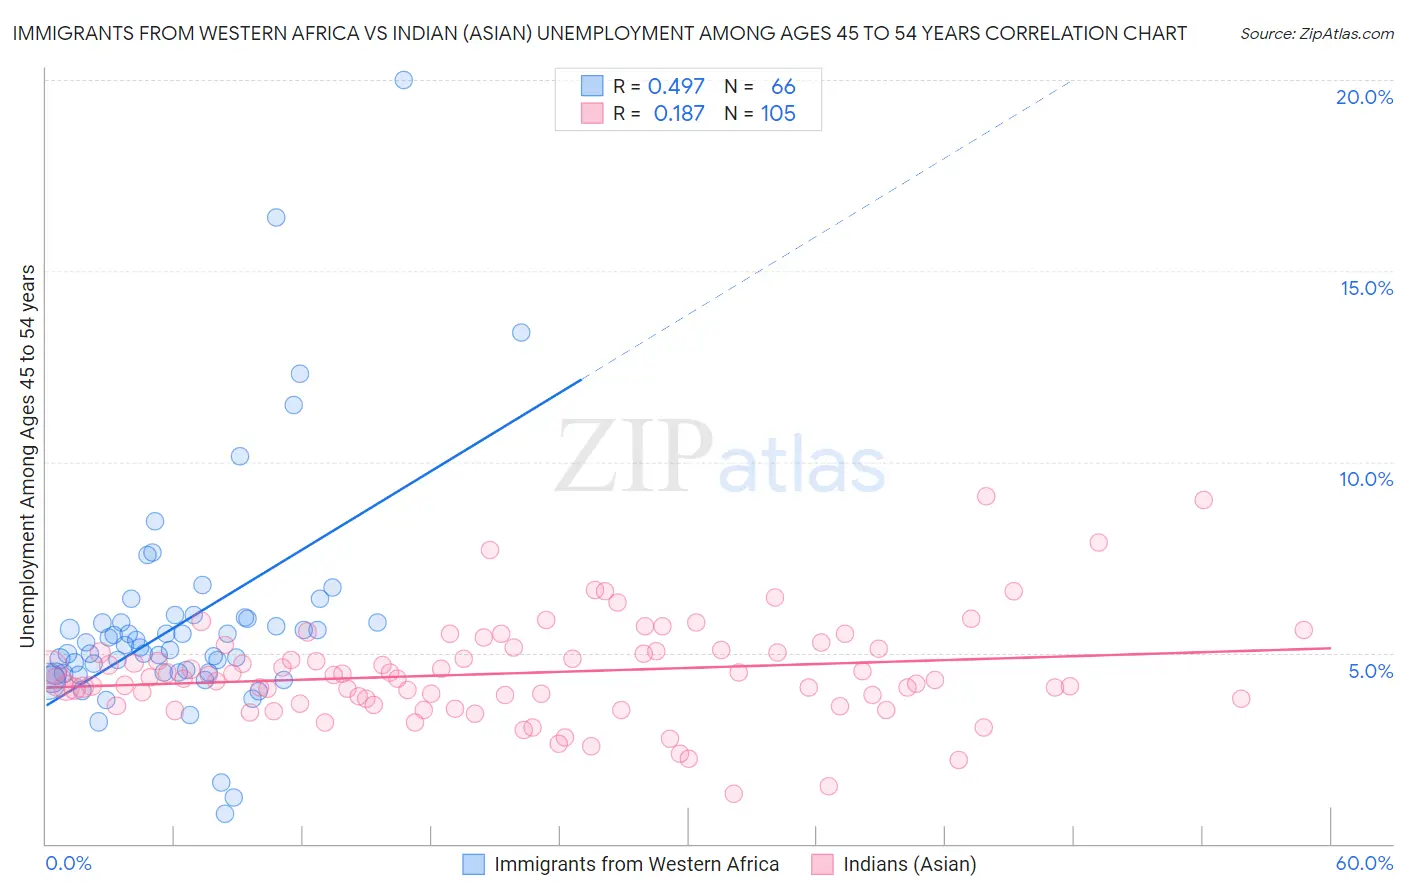 Immigrants from Western Africa vs Indian (Asian) Unemployment Among Ages 45 to 54 years